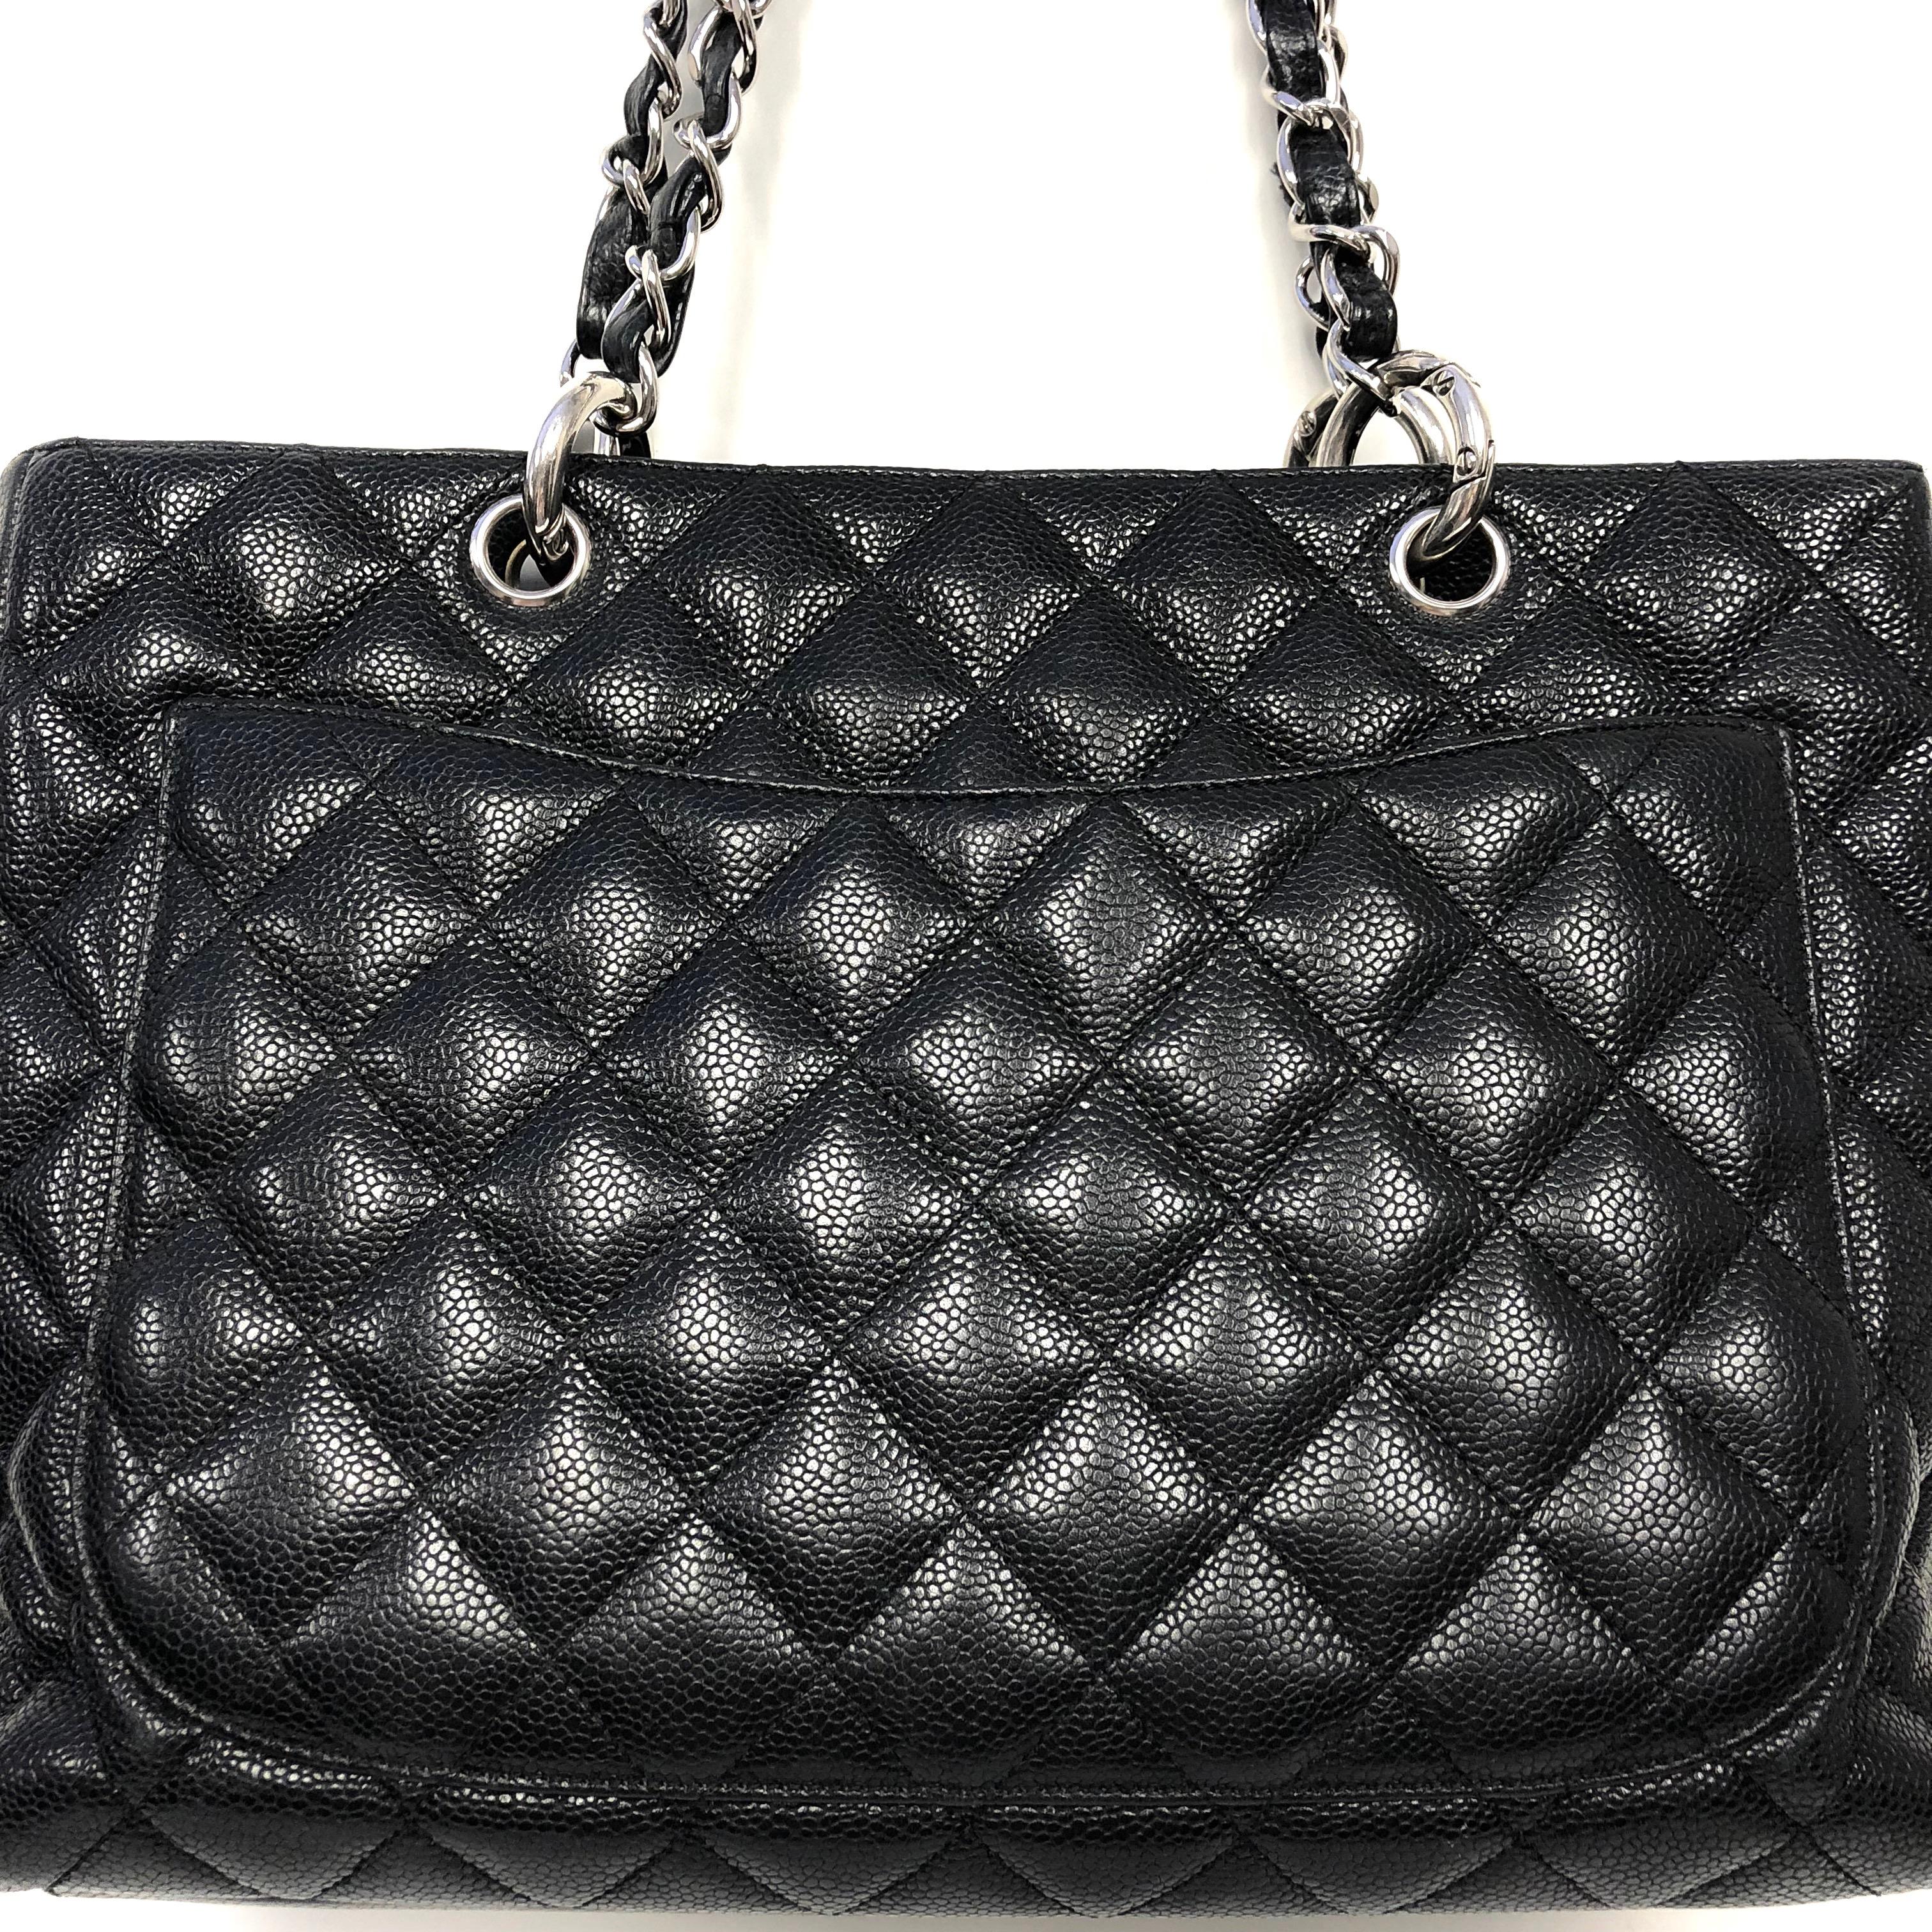 CHANEL Black Caviar Leather Grand Shopping Tote Bag 1